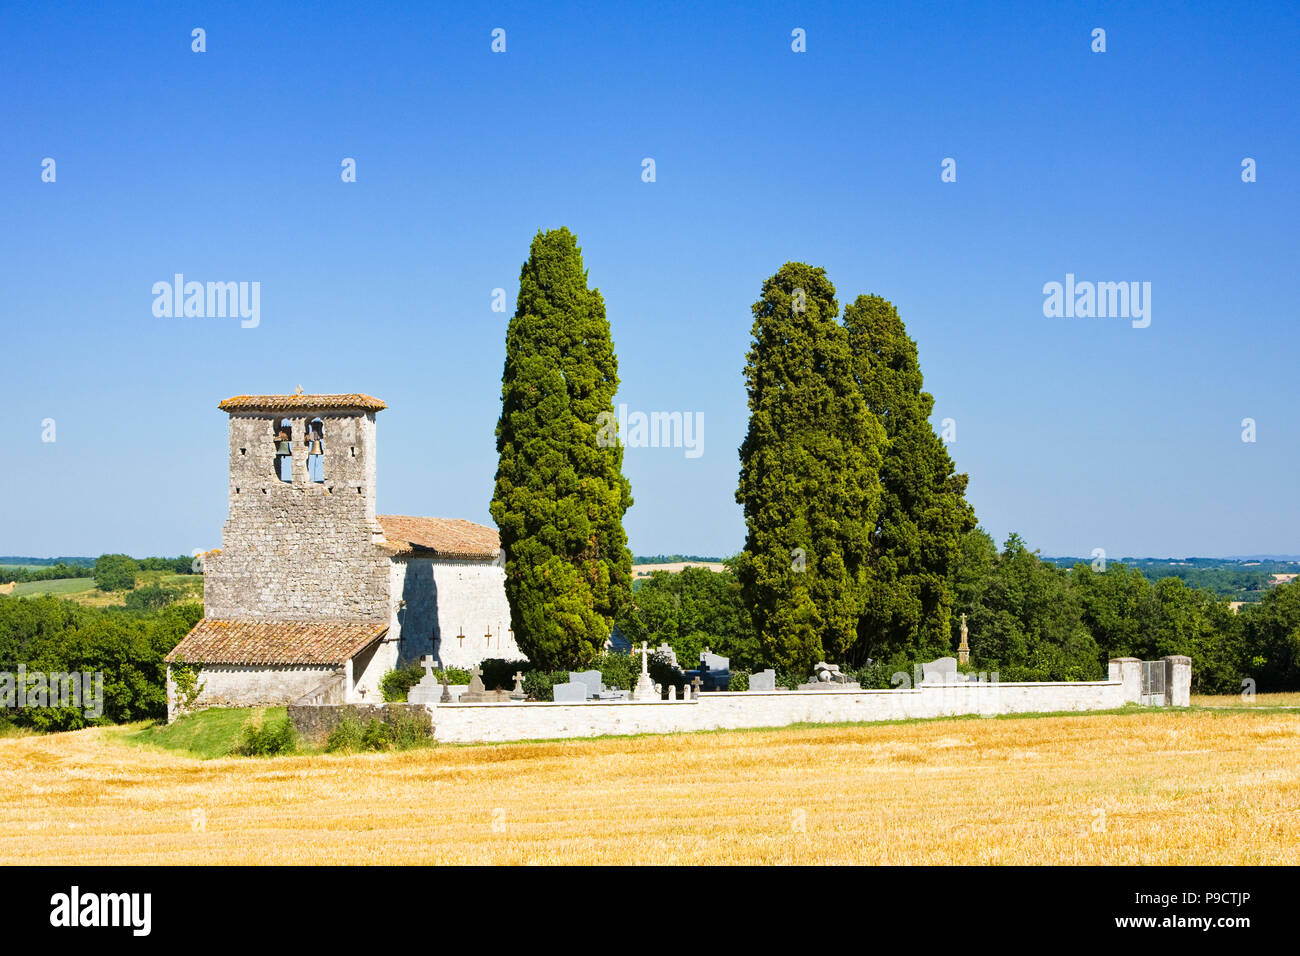 Small chapel church in the French countryisde of Tarn et Garonne, France, Europe Stock Photo